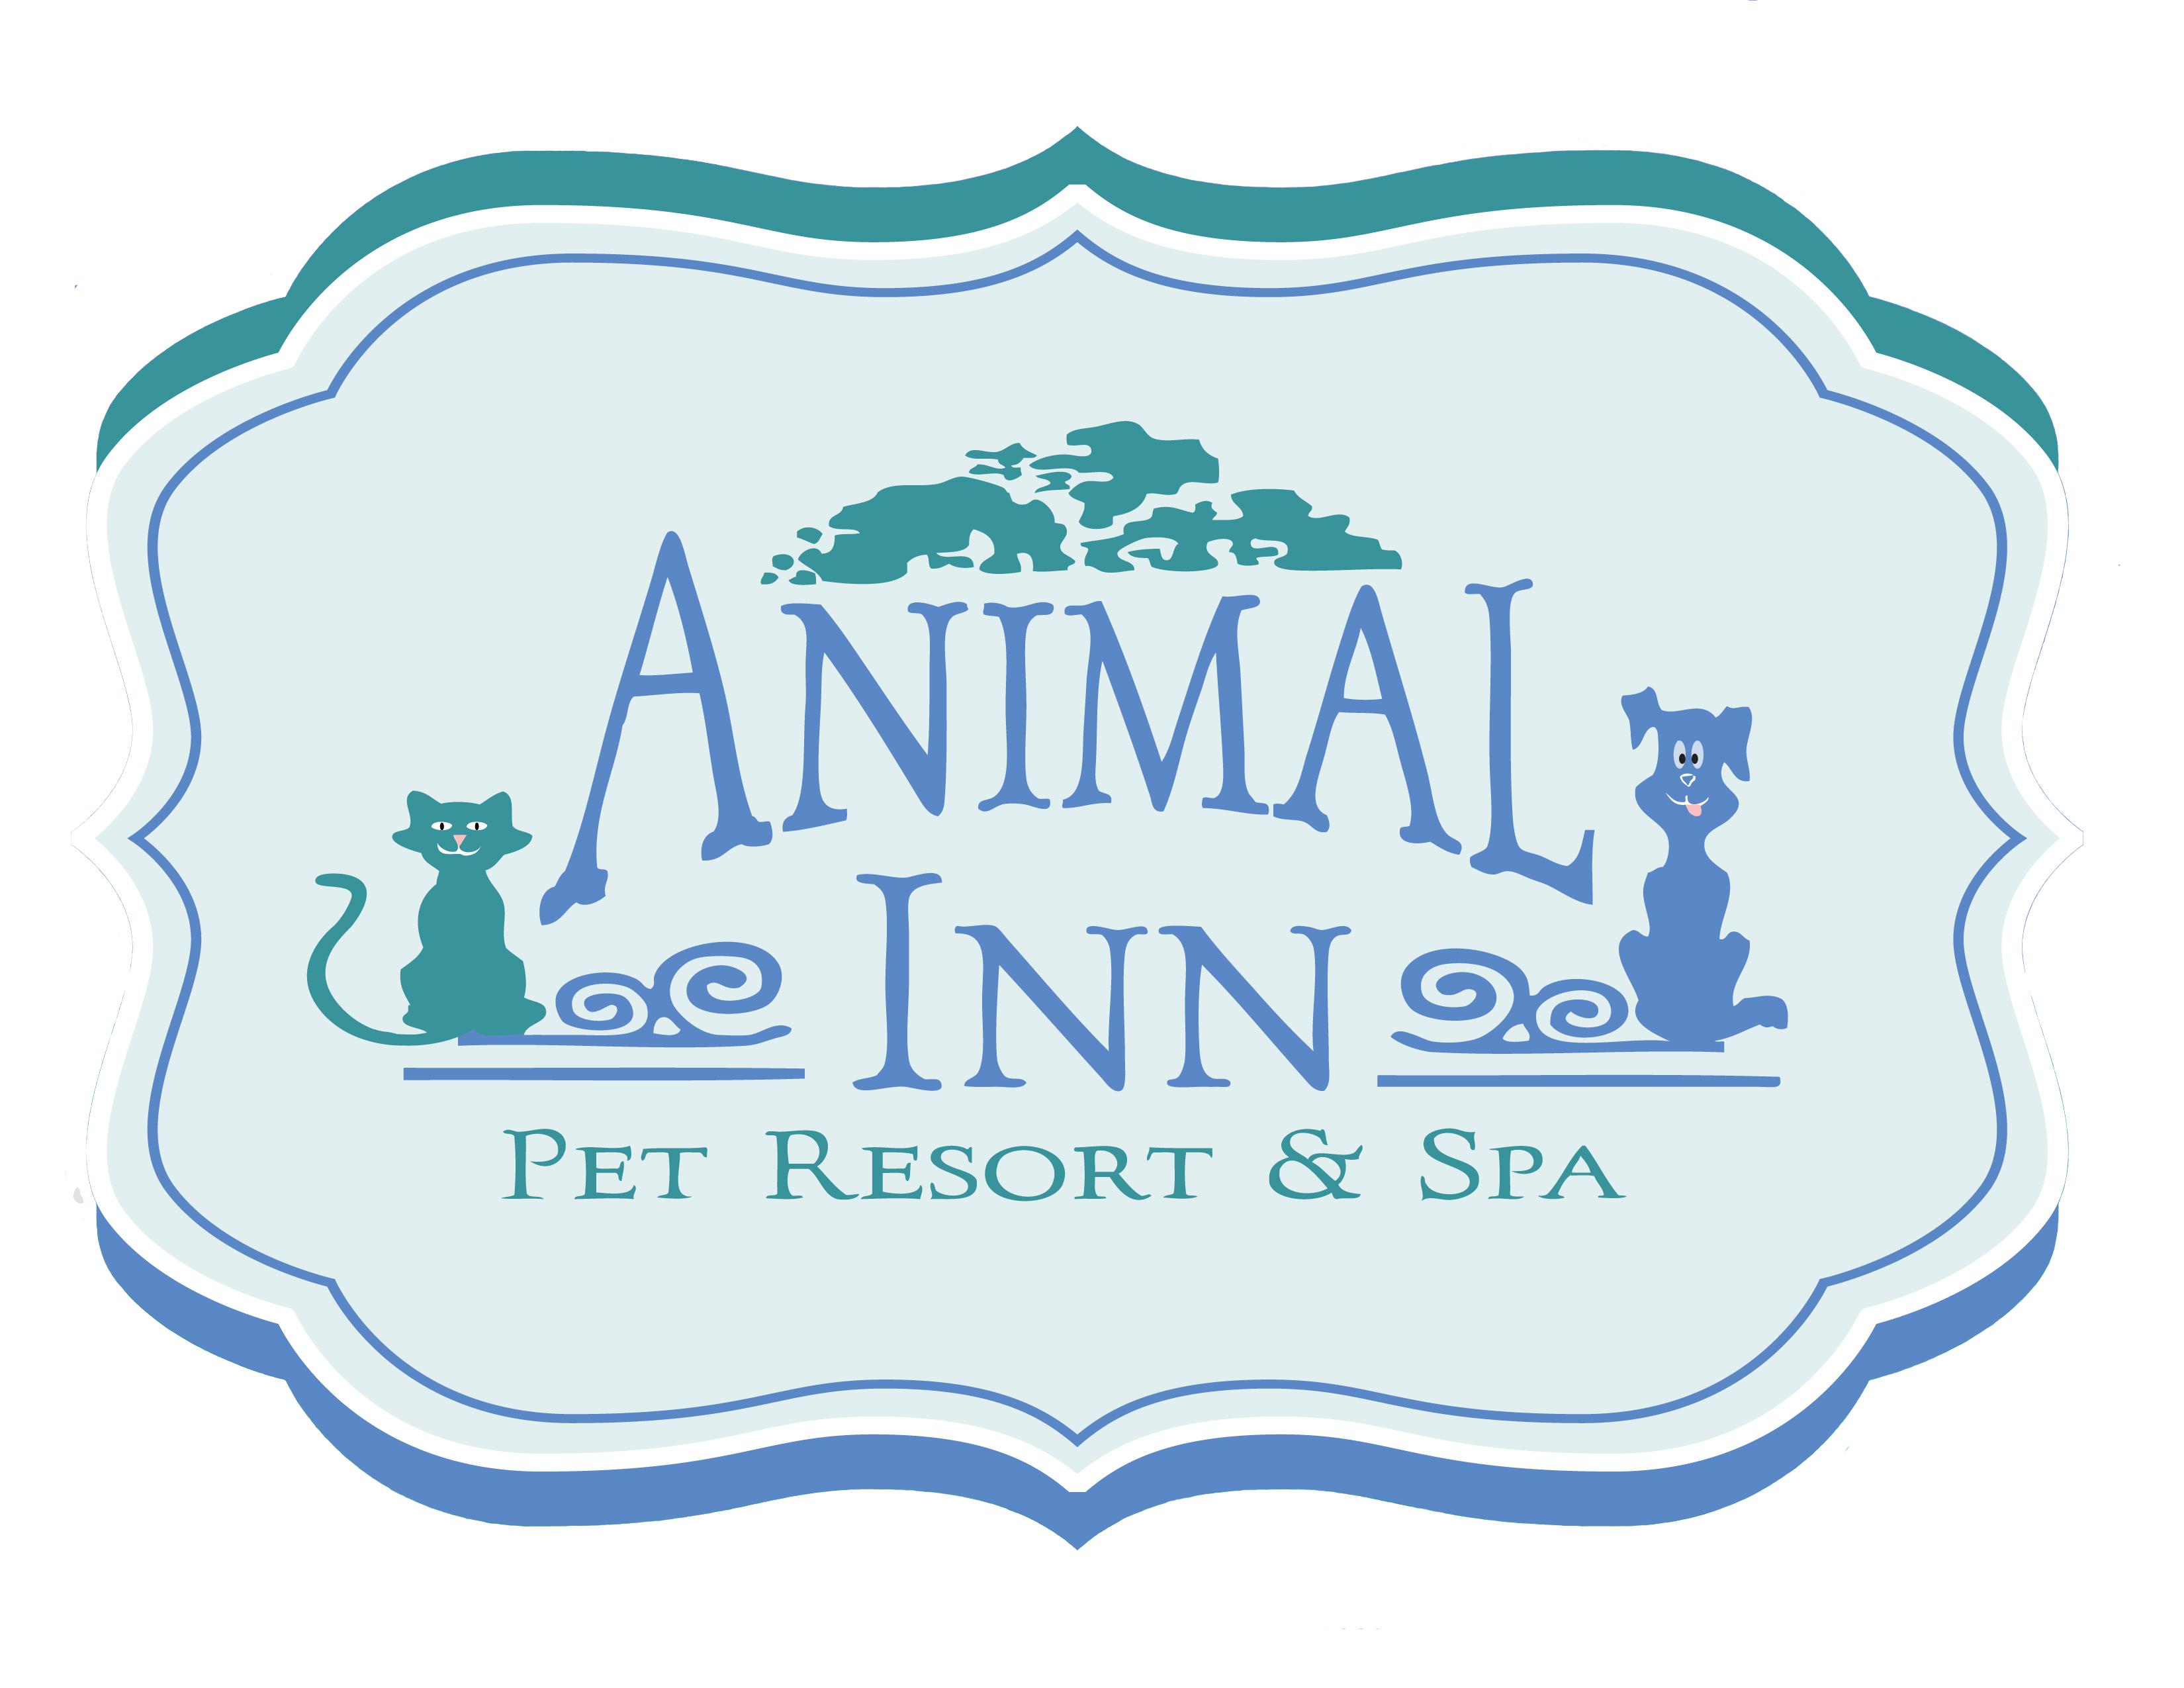 What questions to ask when looking for pet boarding - Animal Inn Pet Resort